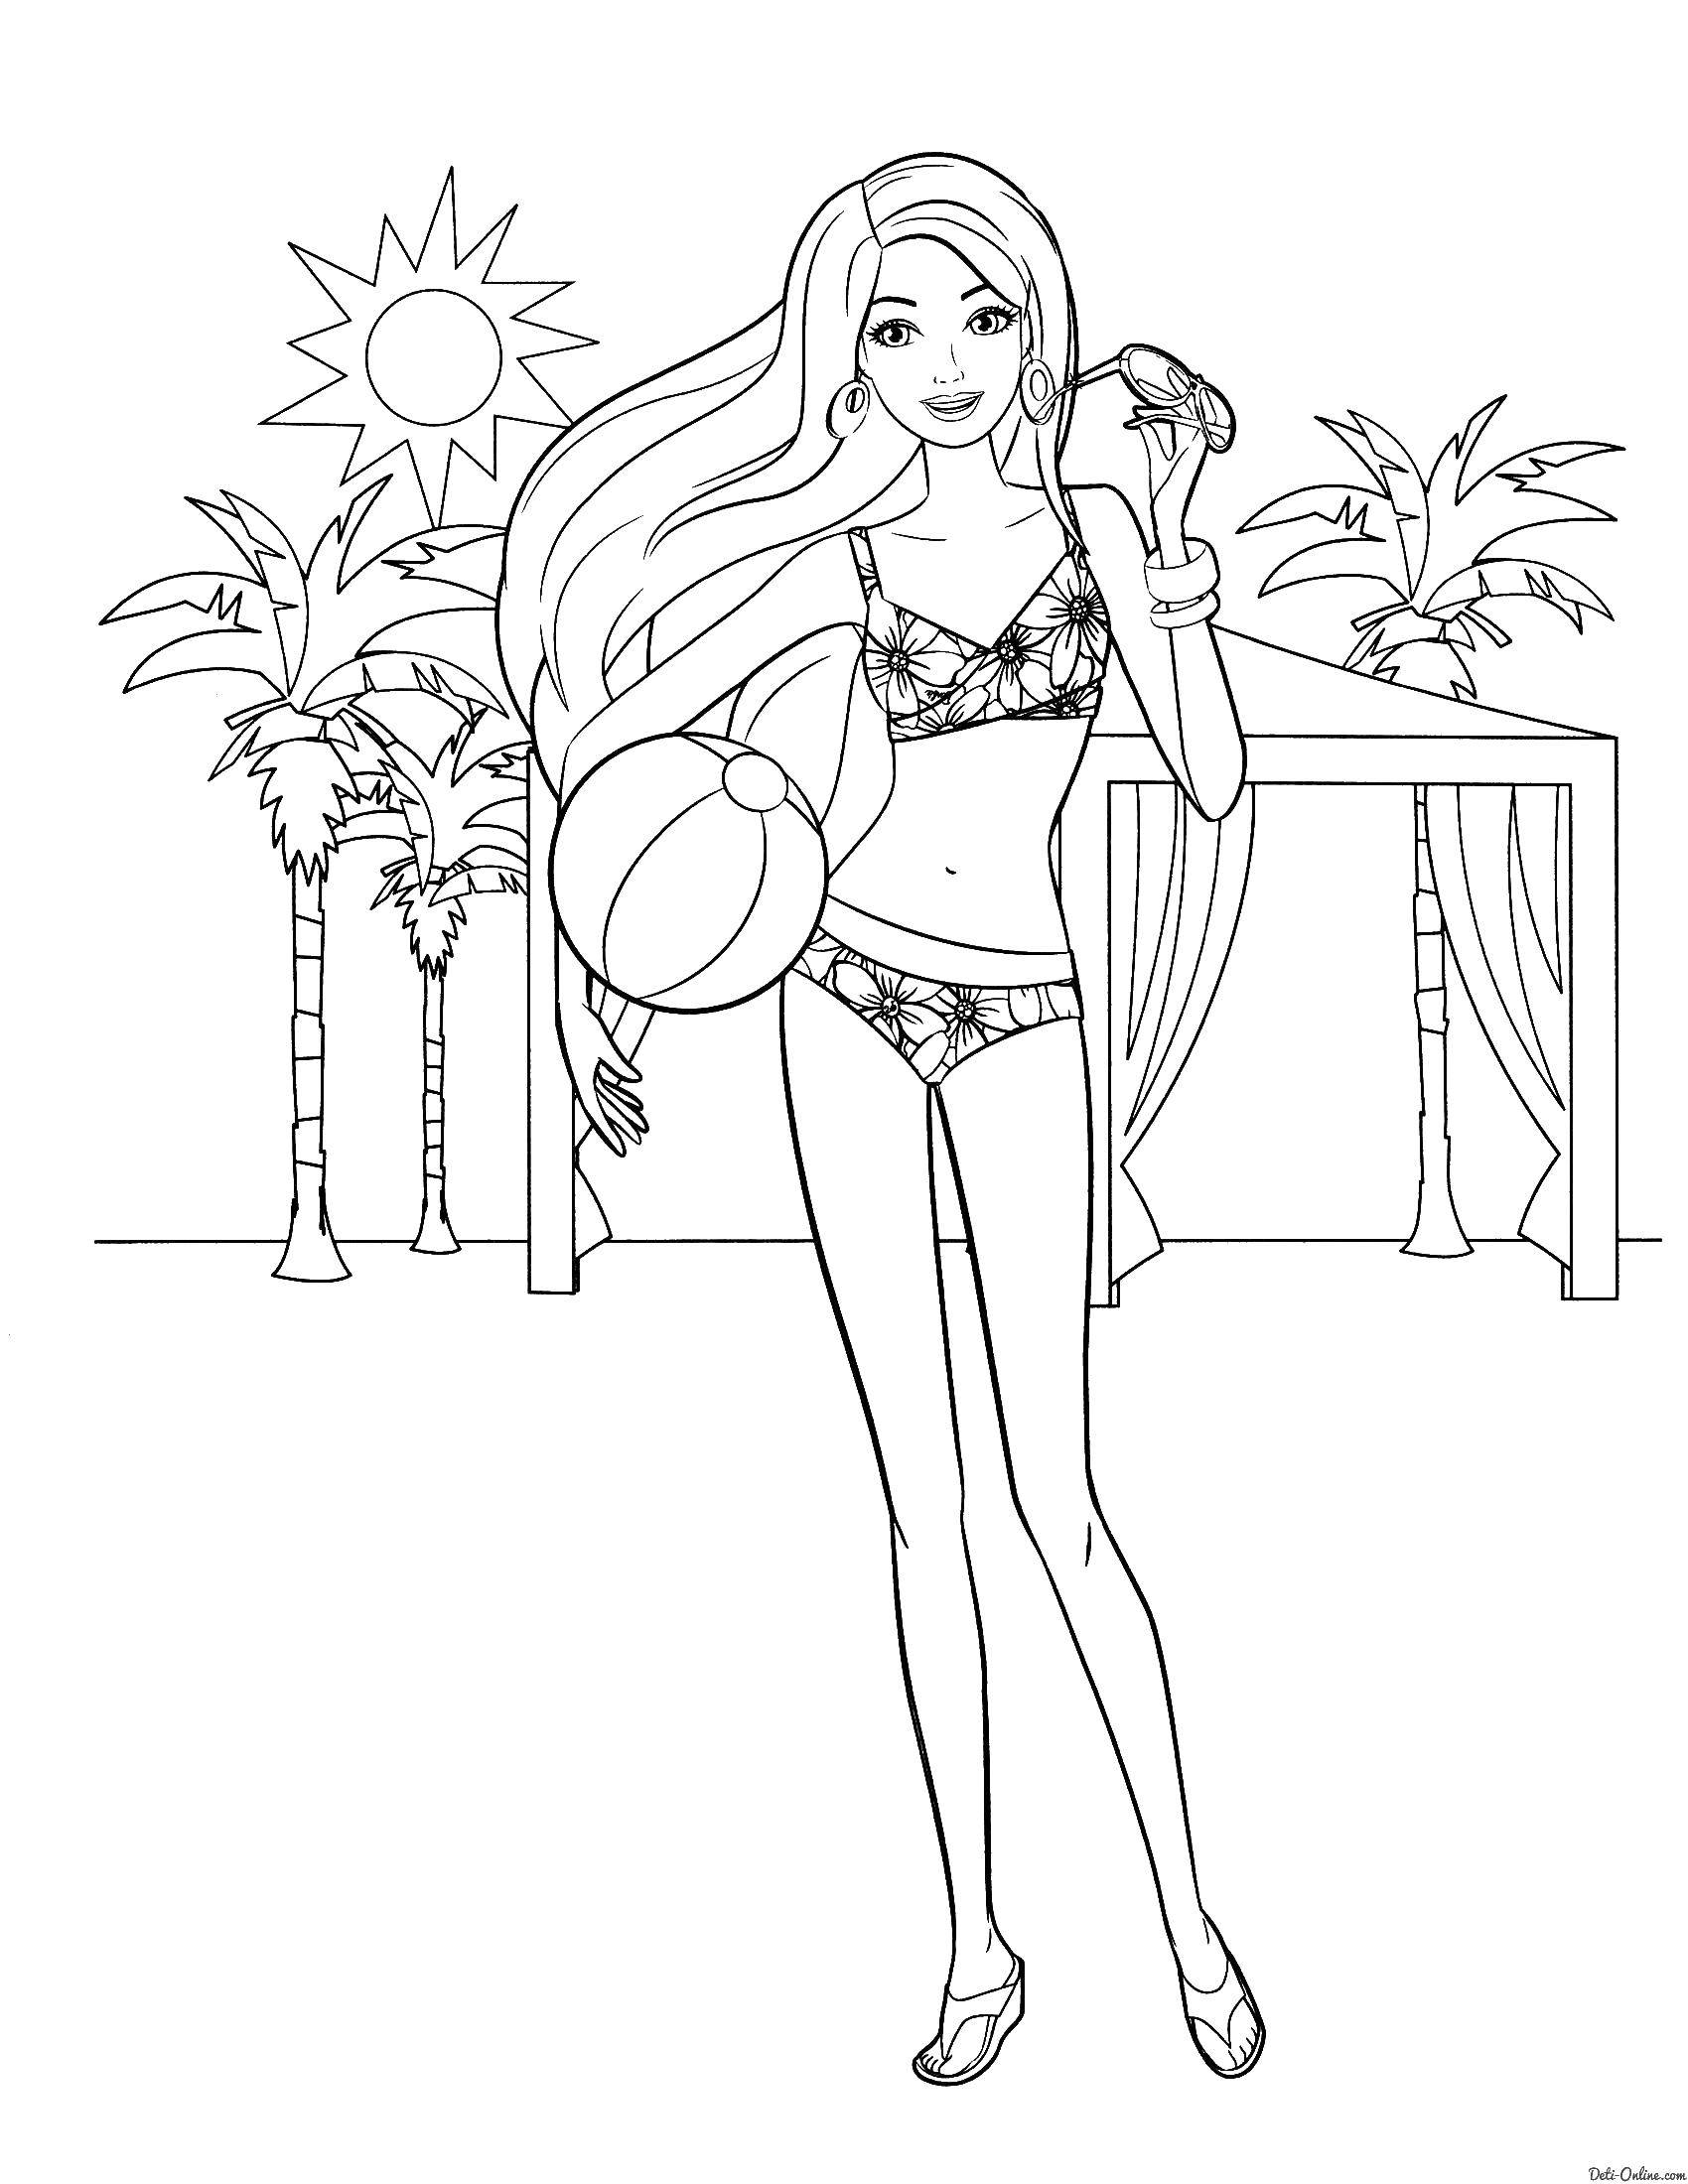 Coloring Barbie on the beach with a ball. Category Barbie . Tags:  Barbie , beach, ball.